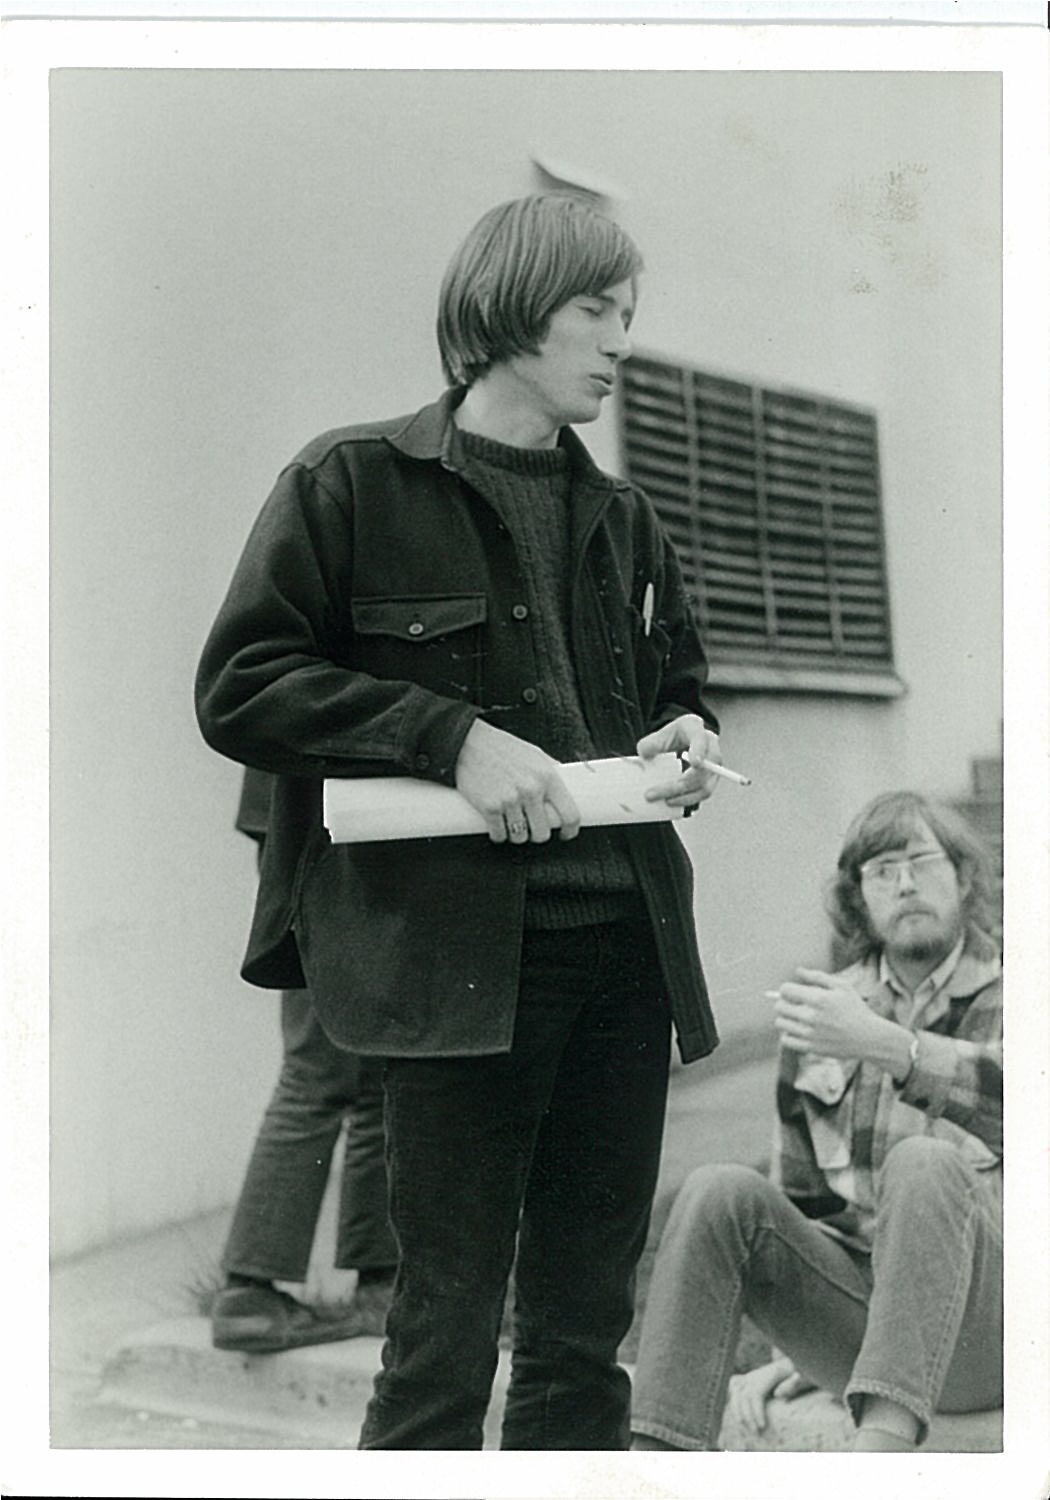 1970s person holding rolled up paper in hand. Another 1970s person sitting on the ground.